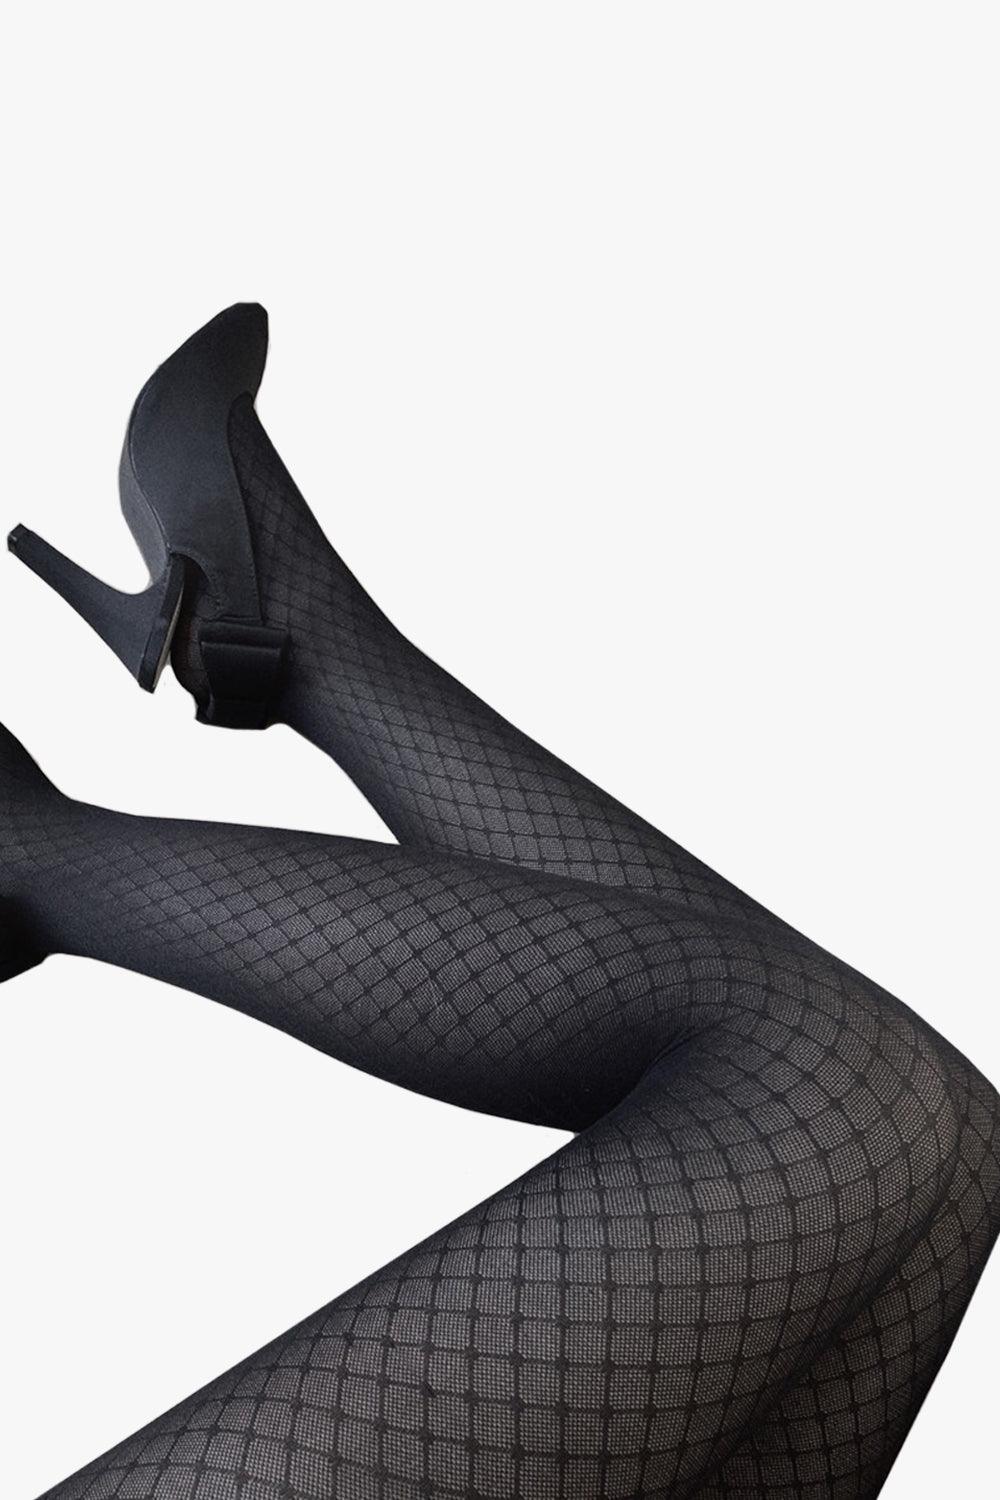 Dark Net Black Tights Goth Aesthetic - Aesthetic Clothes Shop